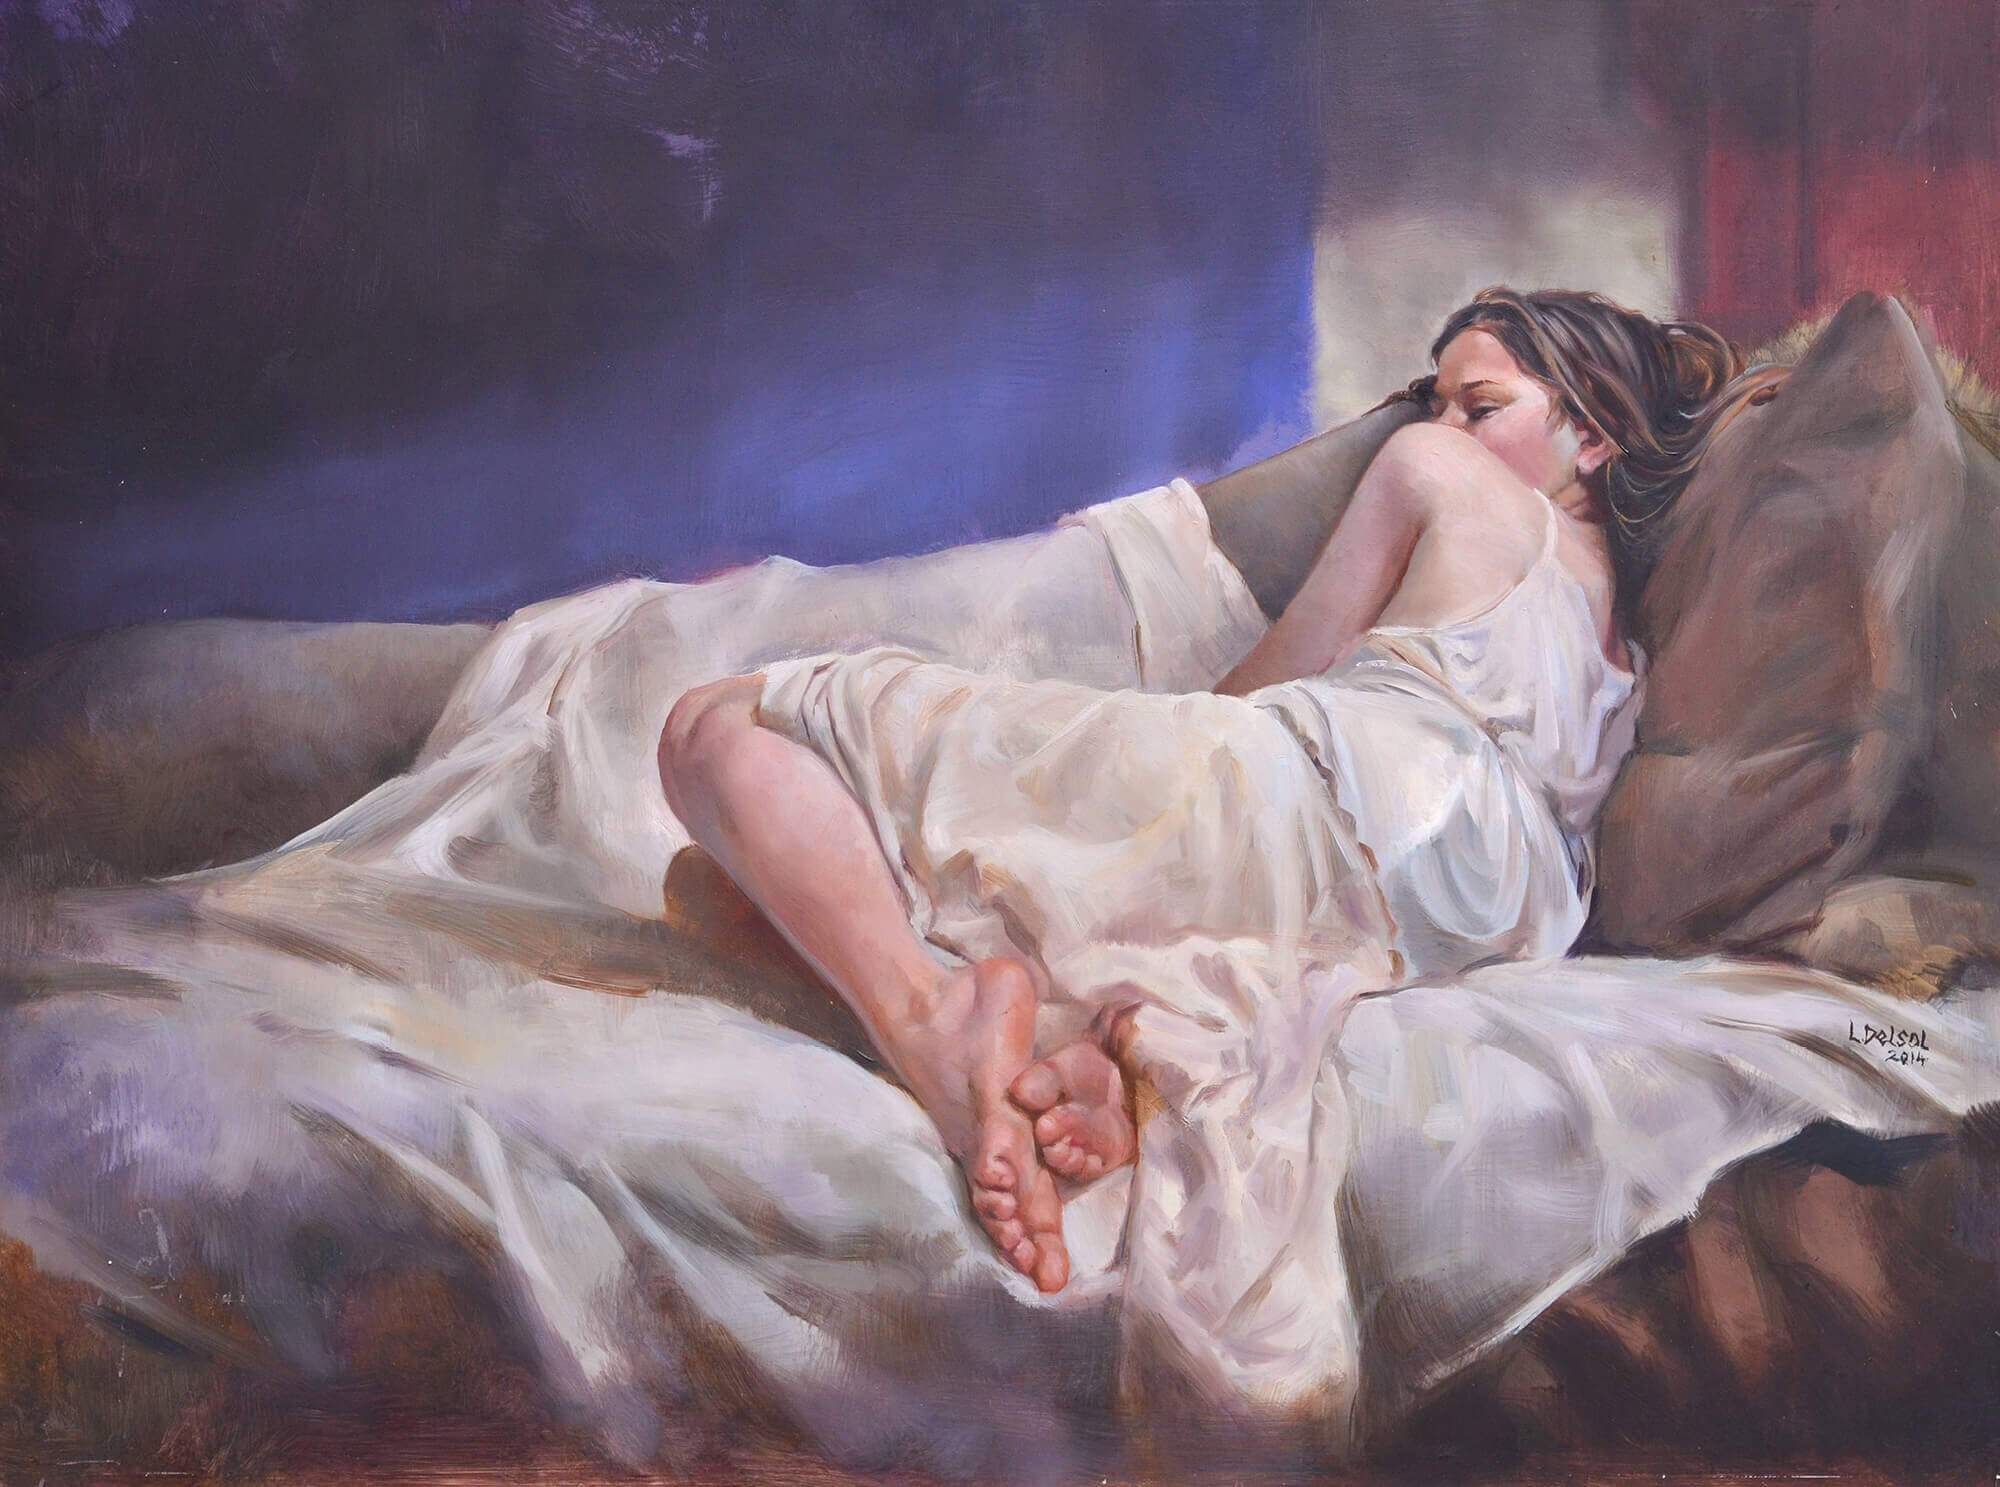 Figurative oil painting of a woman in a white slip laying on a fainting couch with her back to the viewer with a purple wall and red door